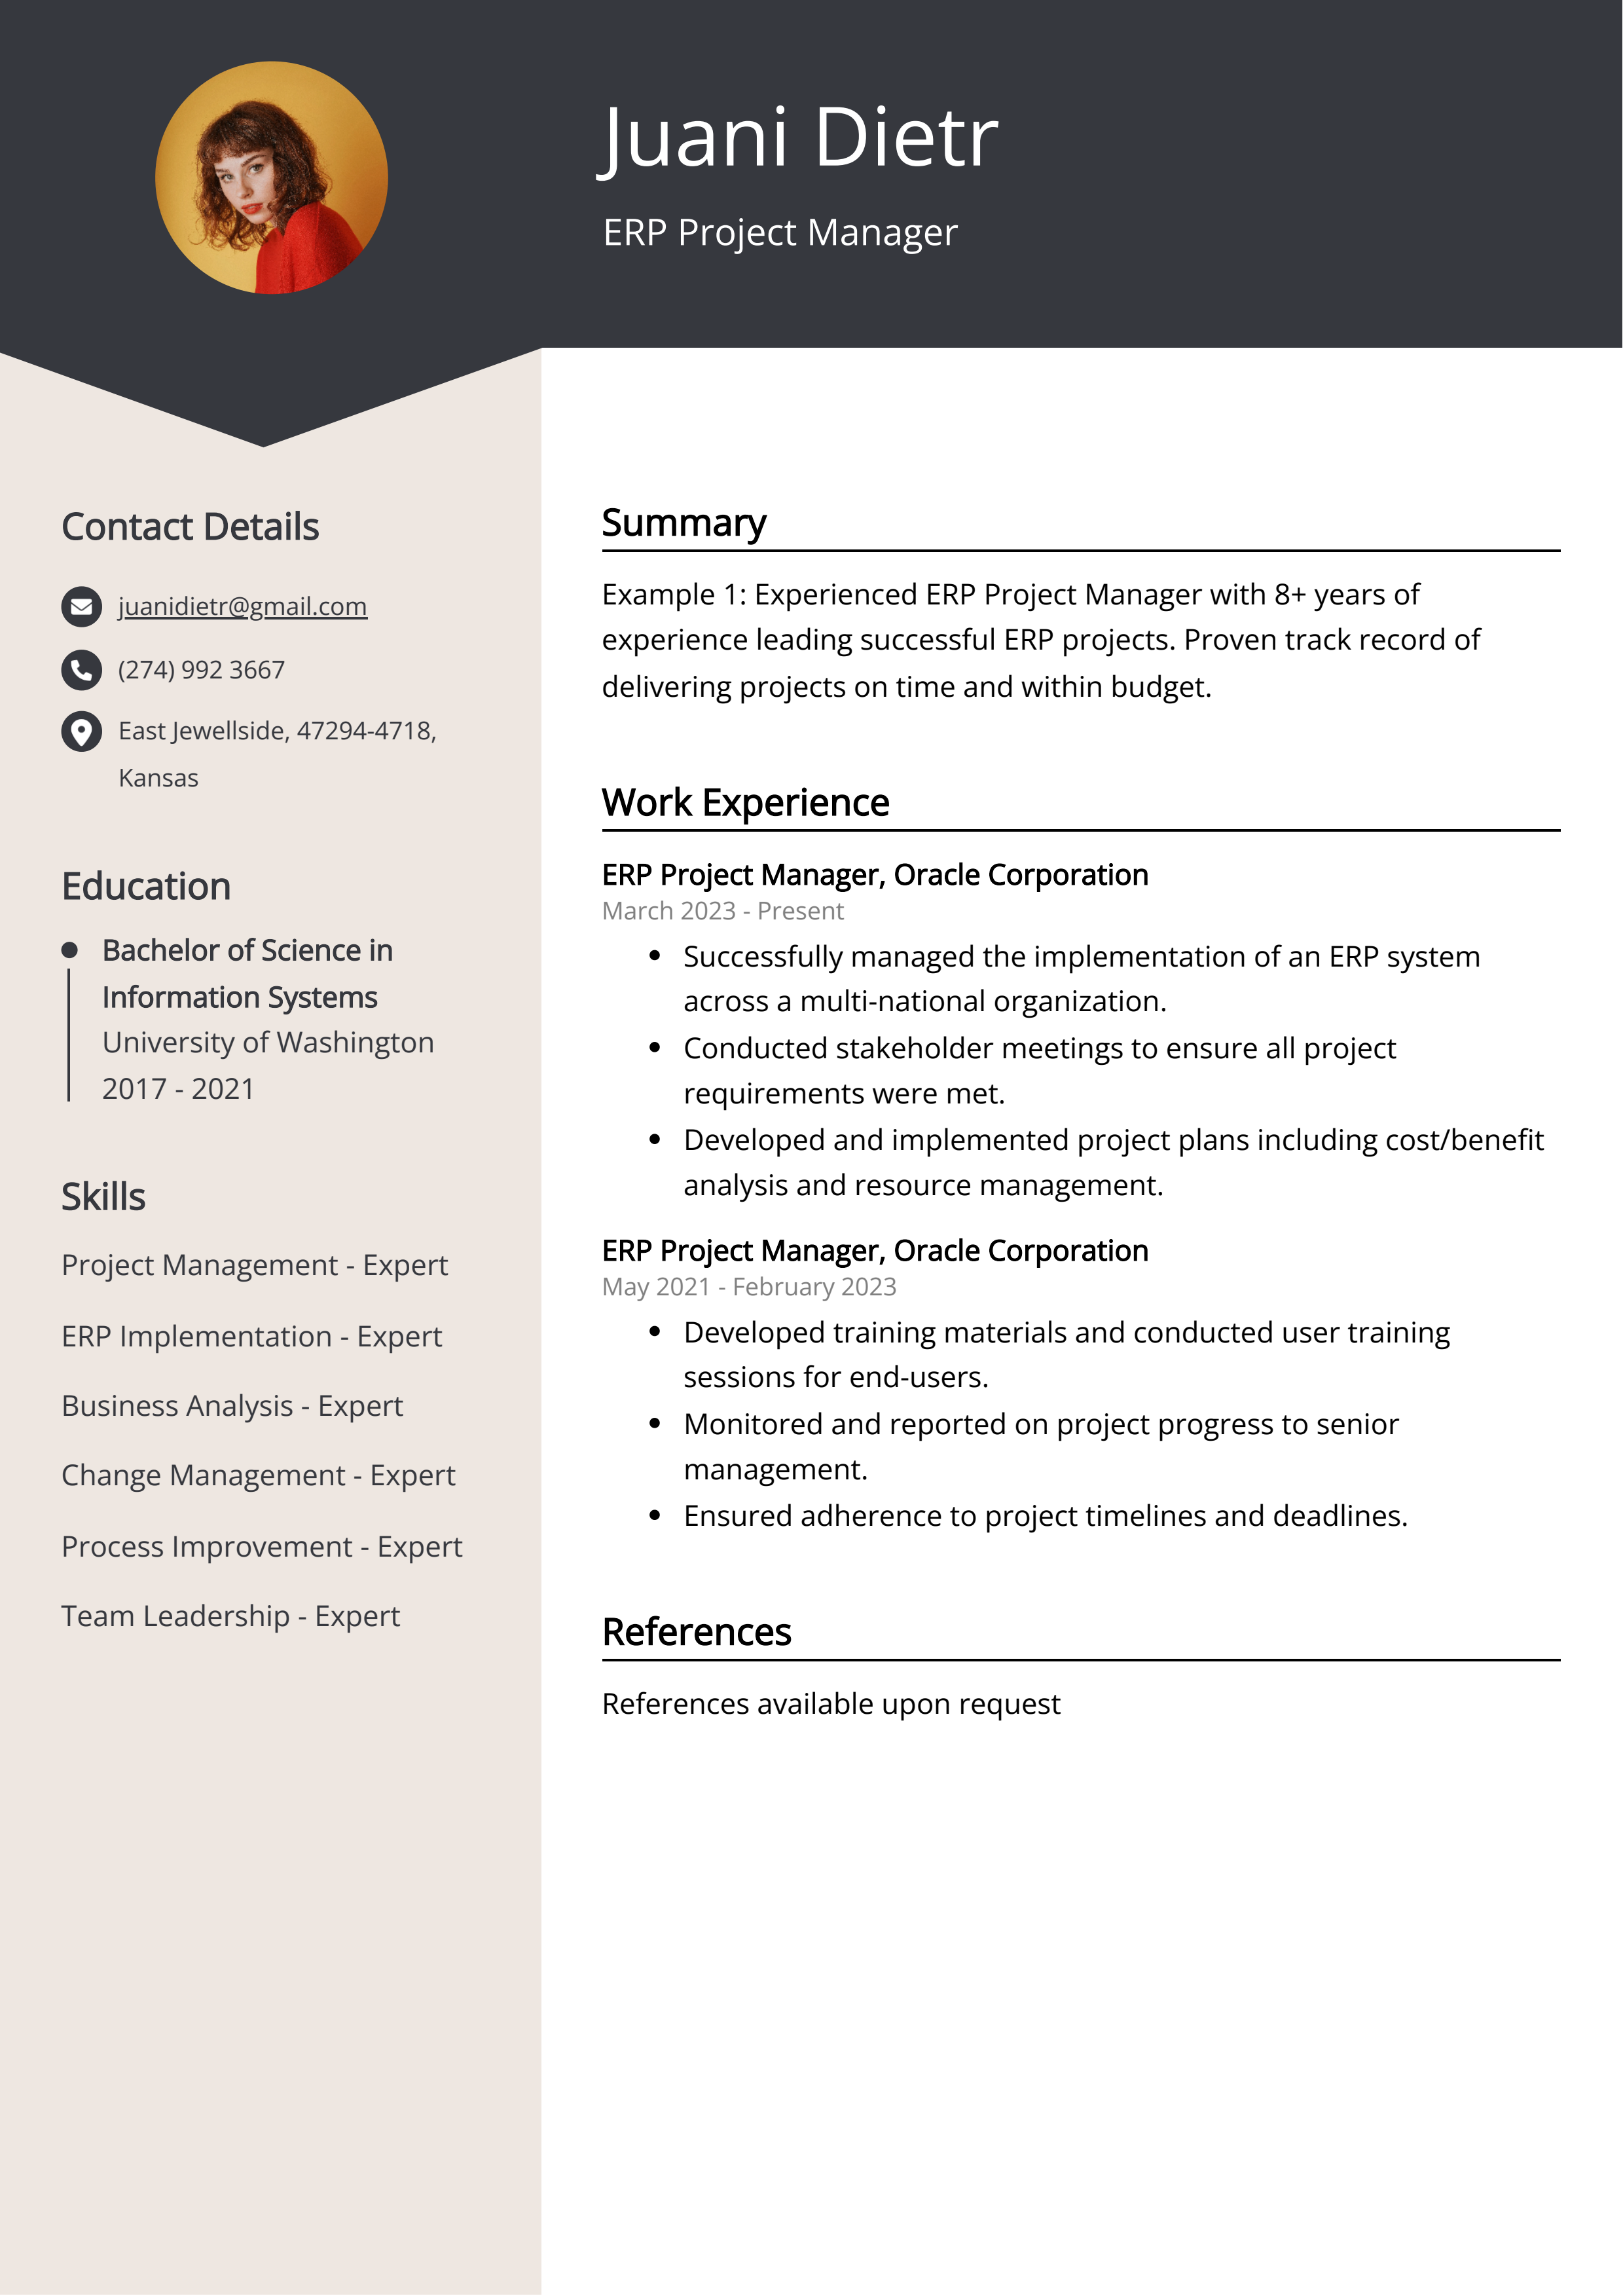 ERP Project Manager CV Example